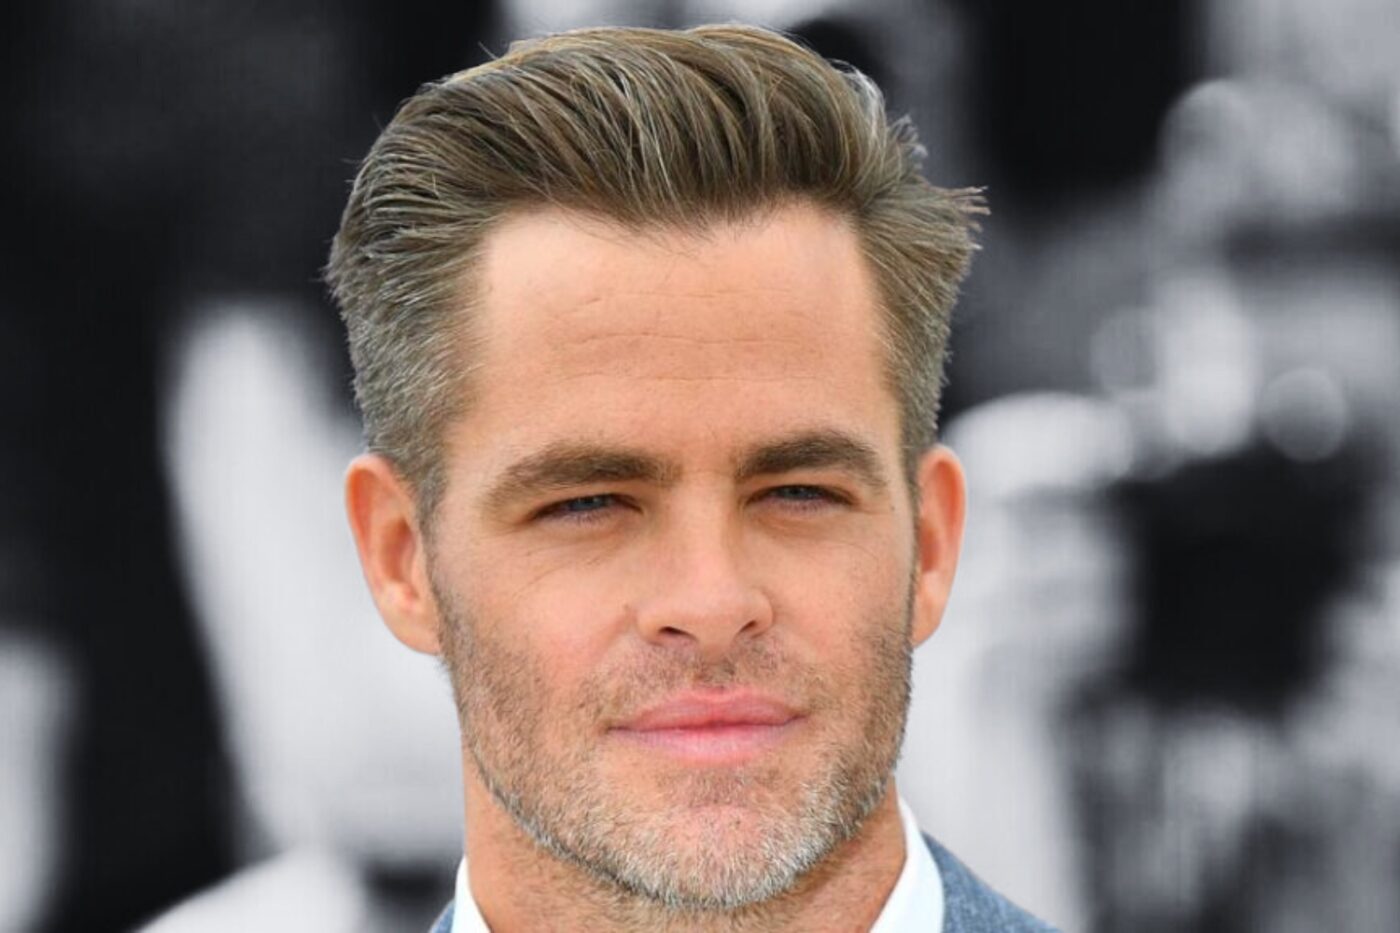 Men Hairstyles with Hair Shaved on the Sides: 25 TOP Looks | All Things  Hair US